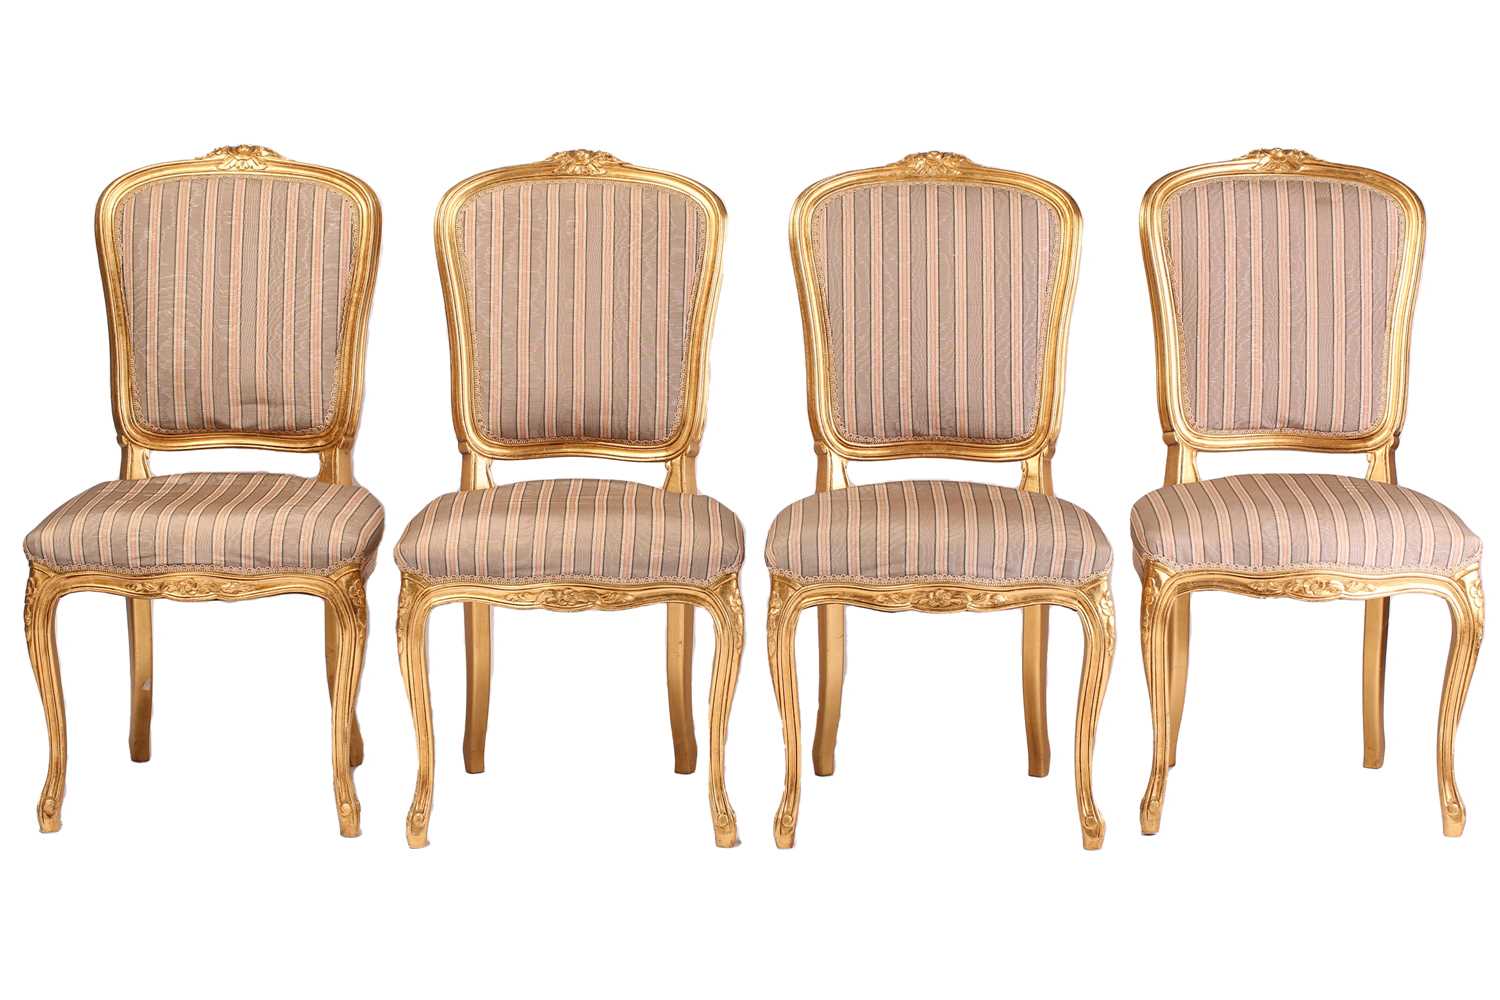 Set of Four Louis XV Style Carved Gilt Salon Chairs